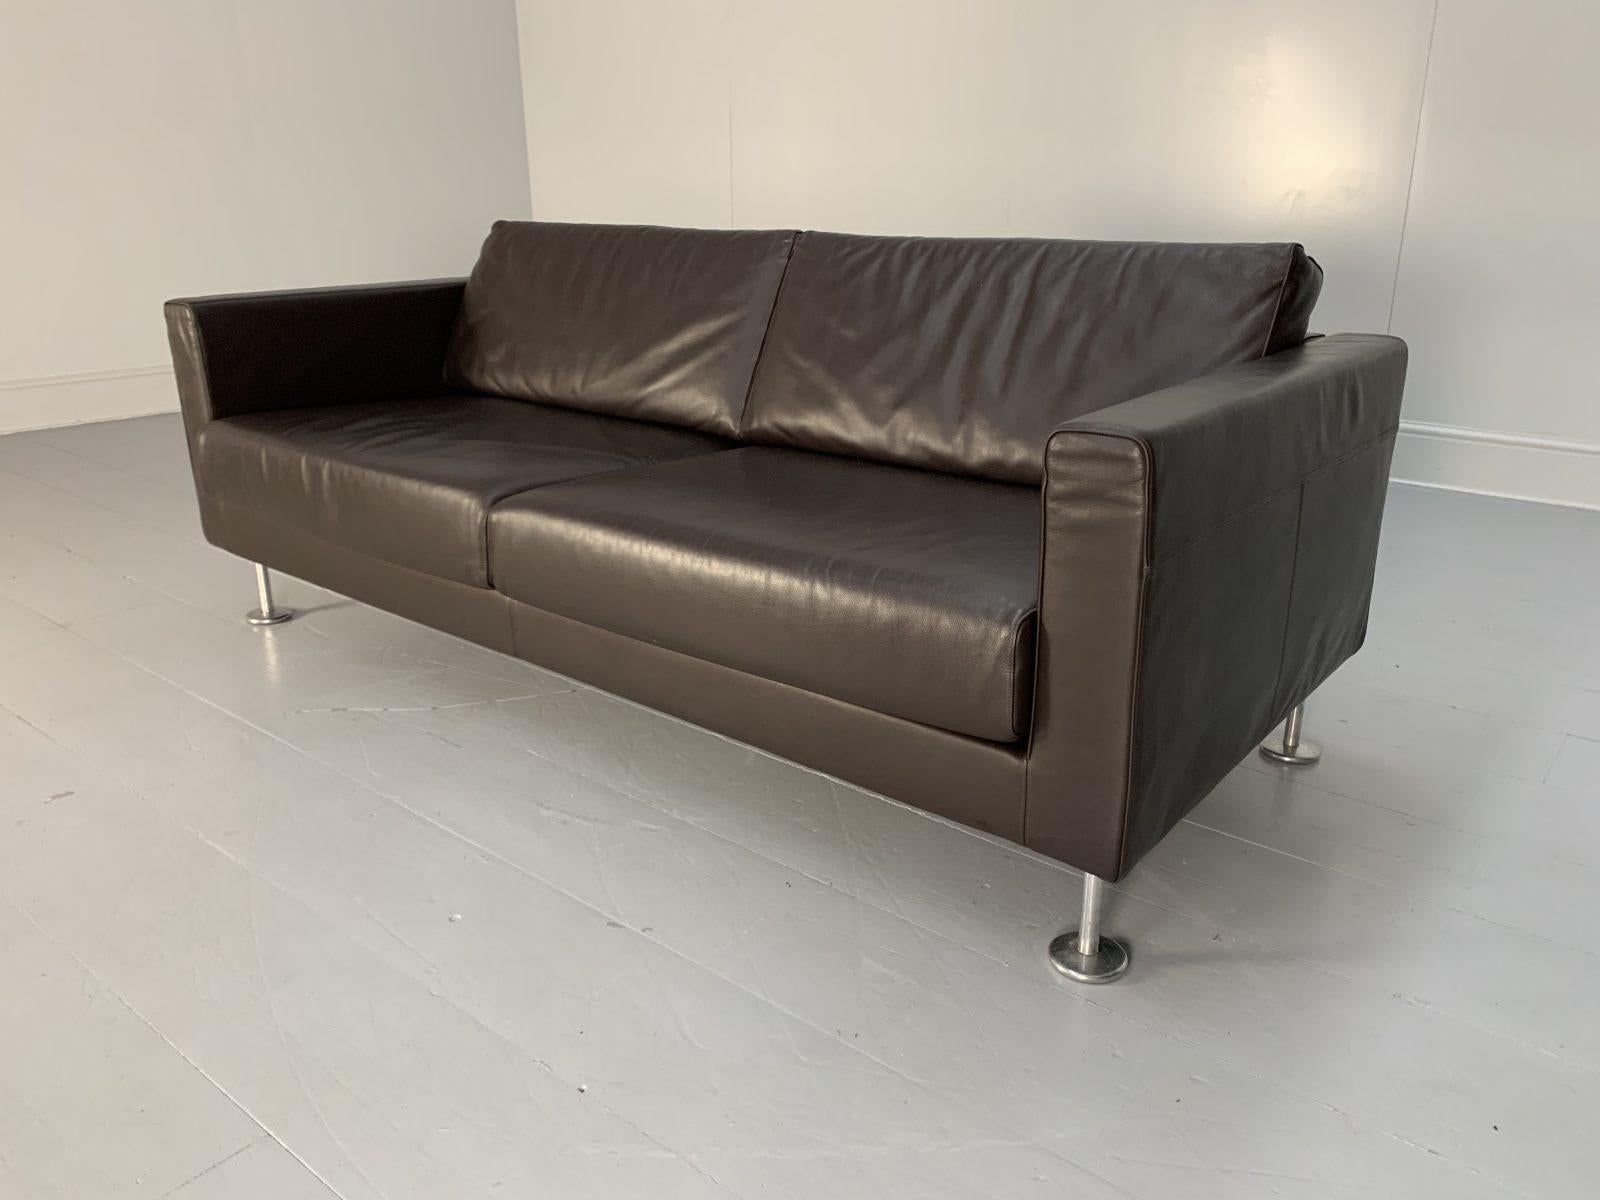 Vitra “Park” 2 Sofa & Armchair Suite, in Dark Brown Leather For Sale 2